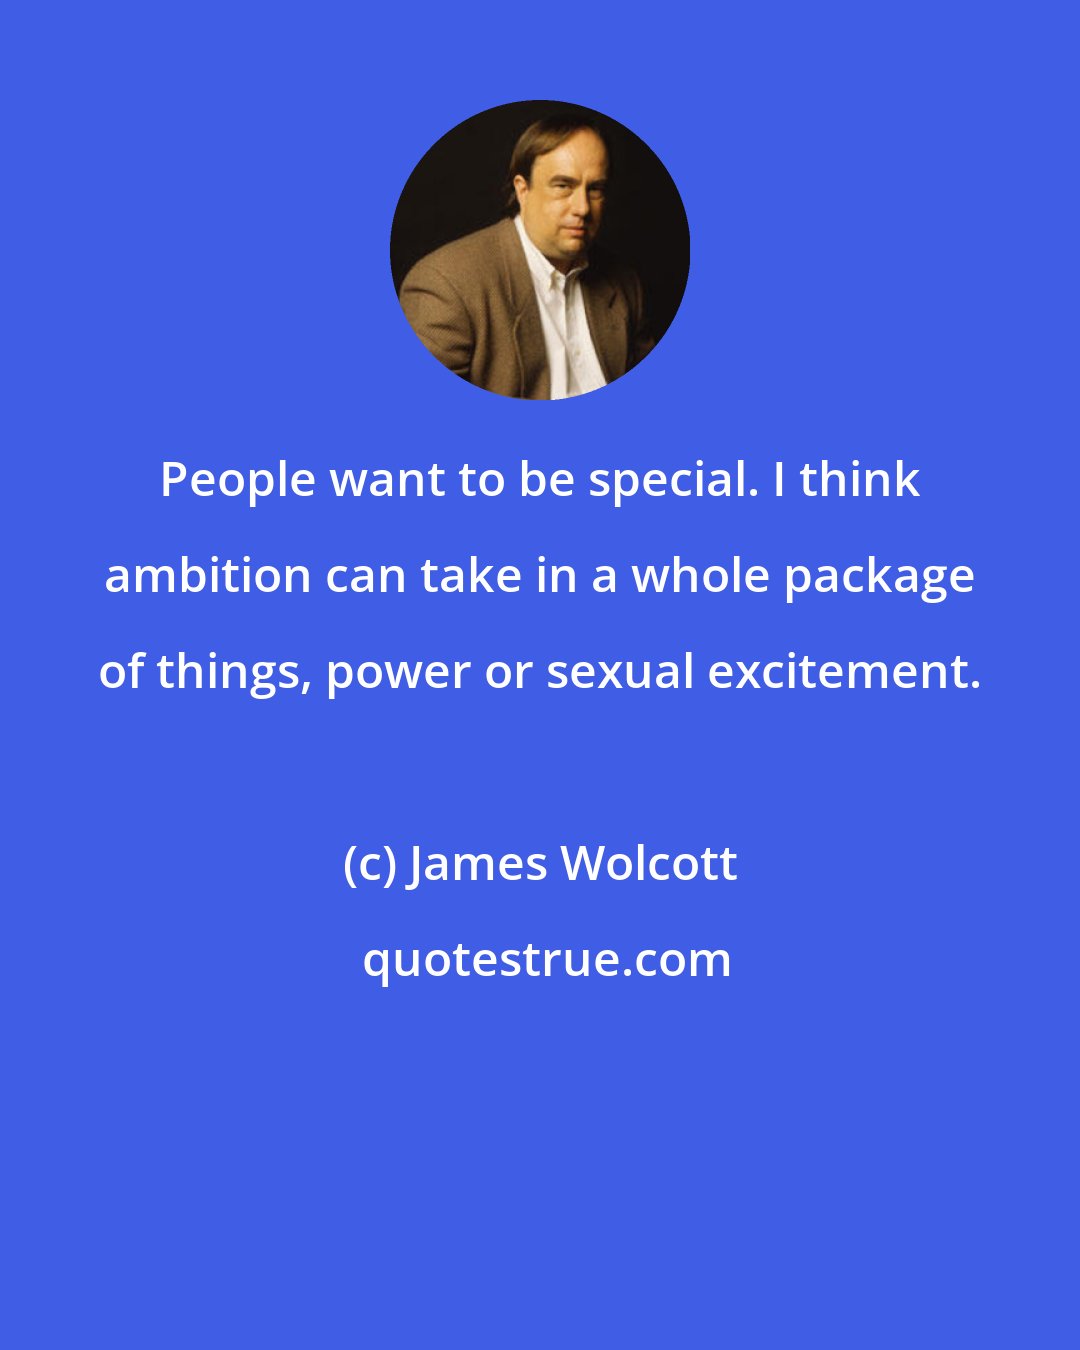 James Wolcott: People want to be special. I think ambition can take in a whole package of things, power or sexual excitement.